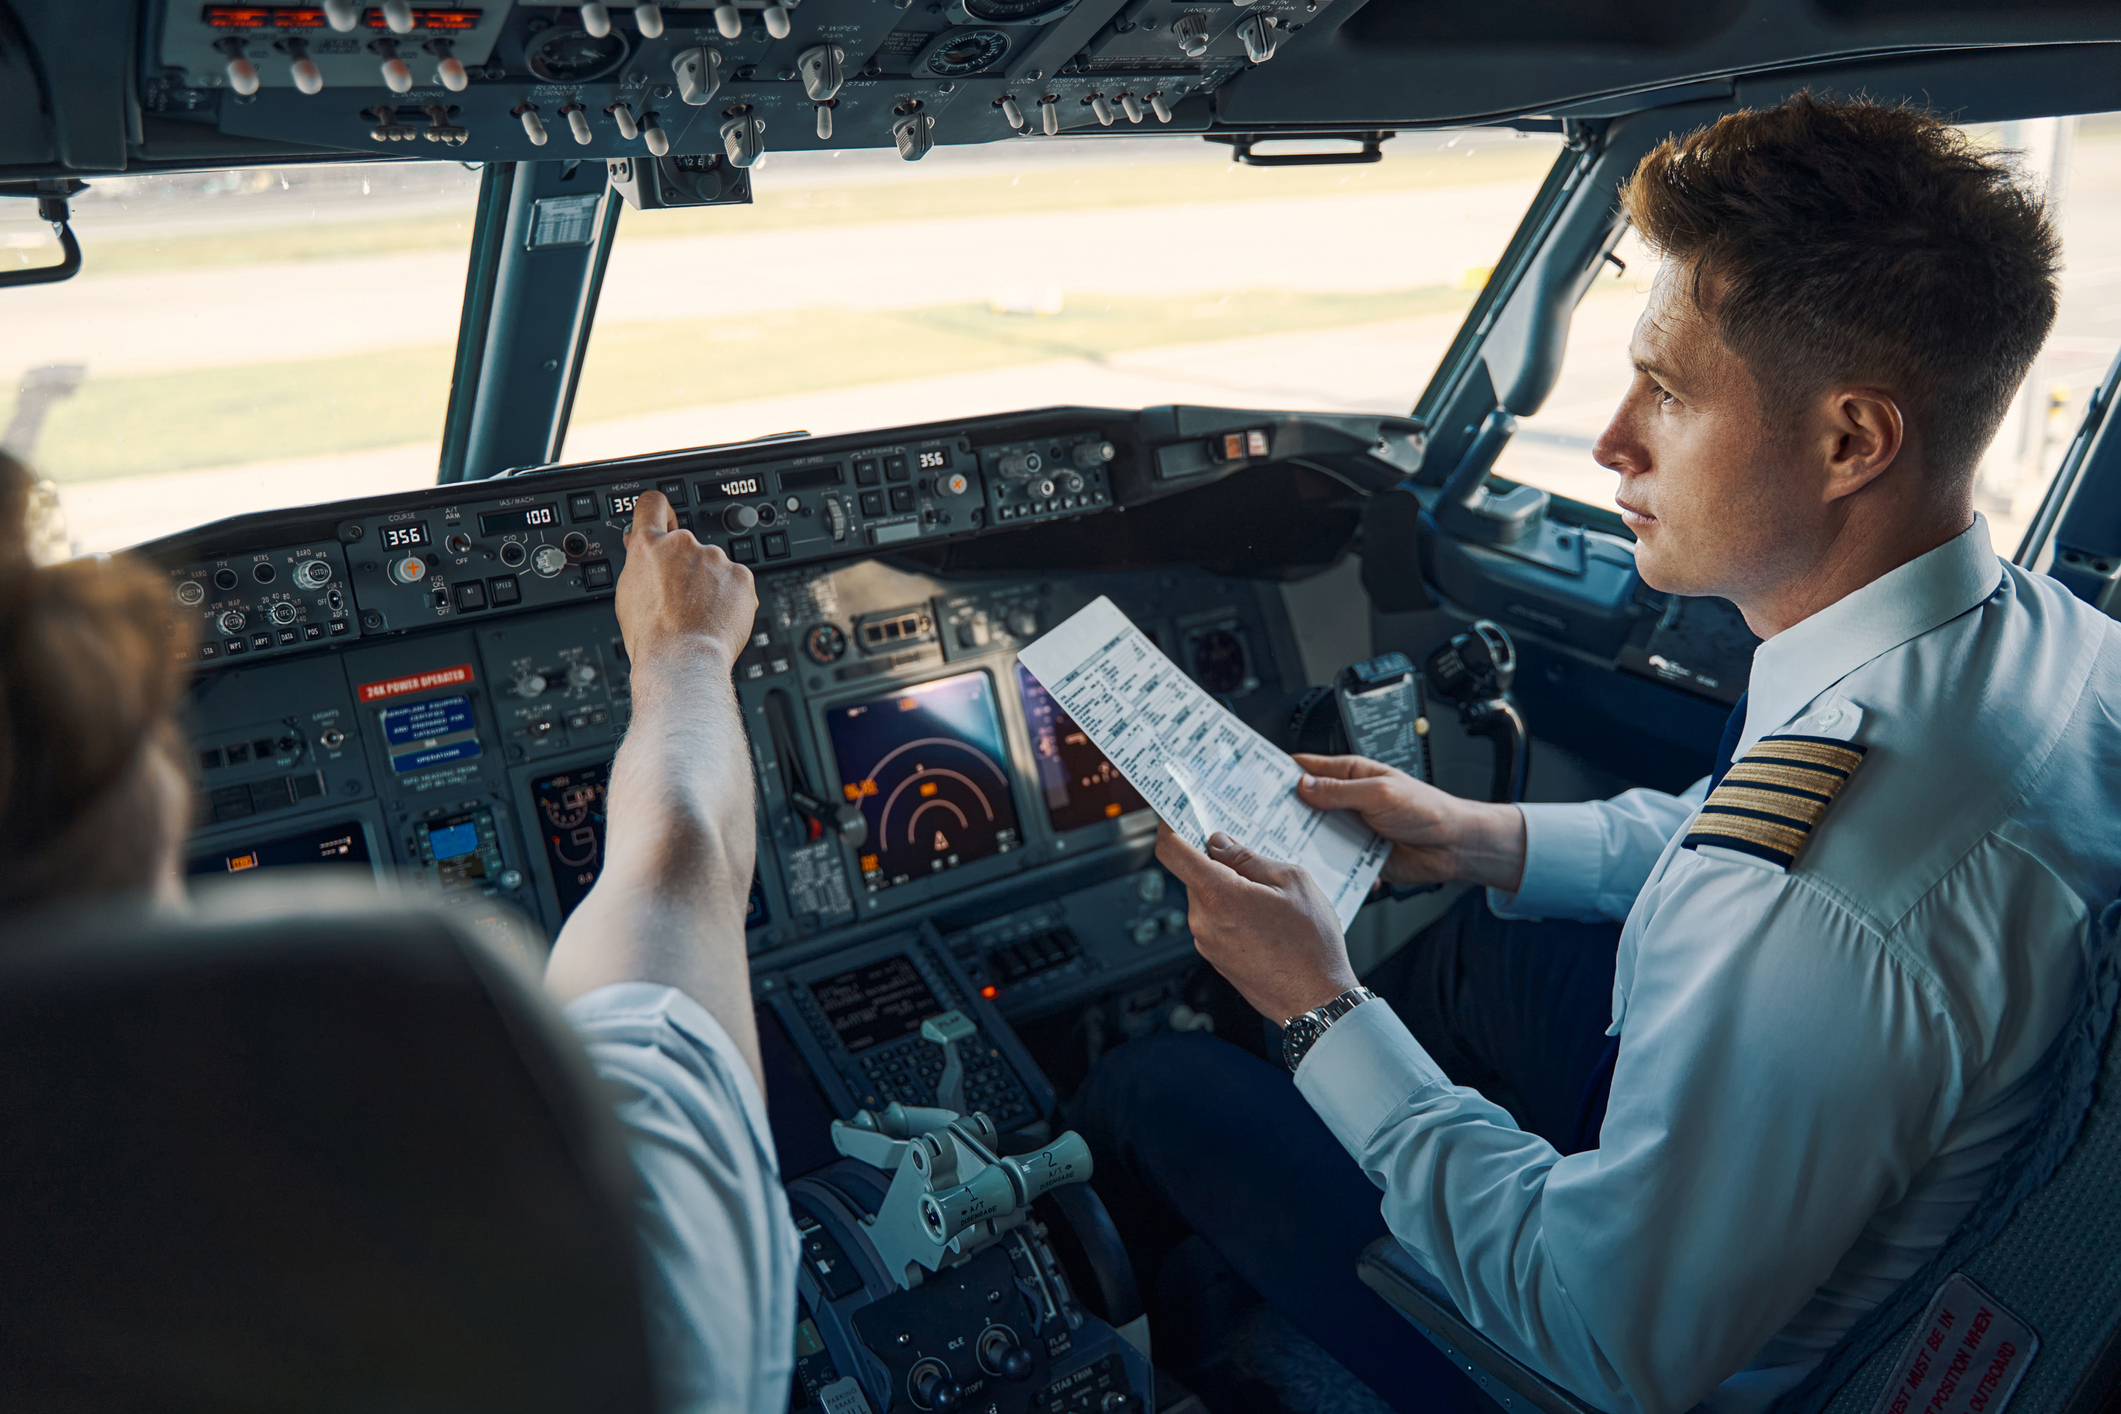 Pilots check instruments and flight information in the cockpit before take-off.